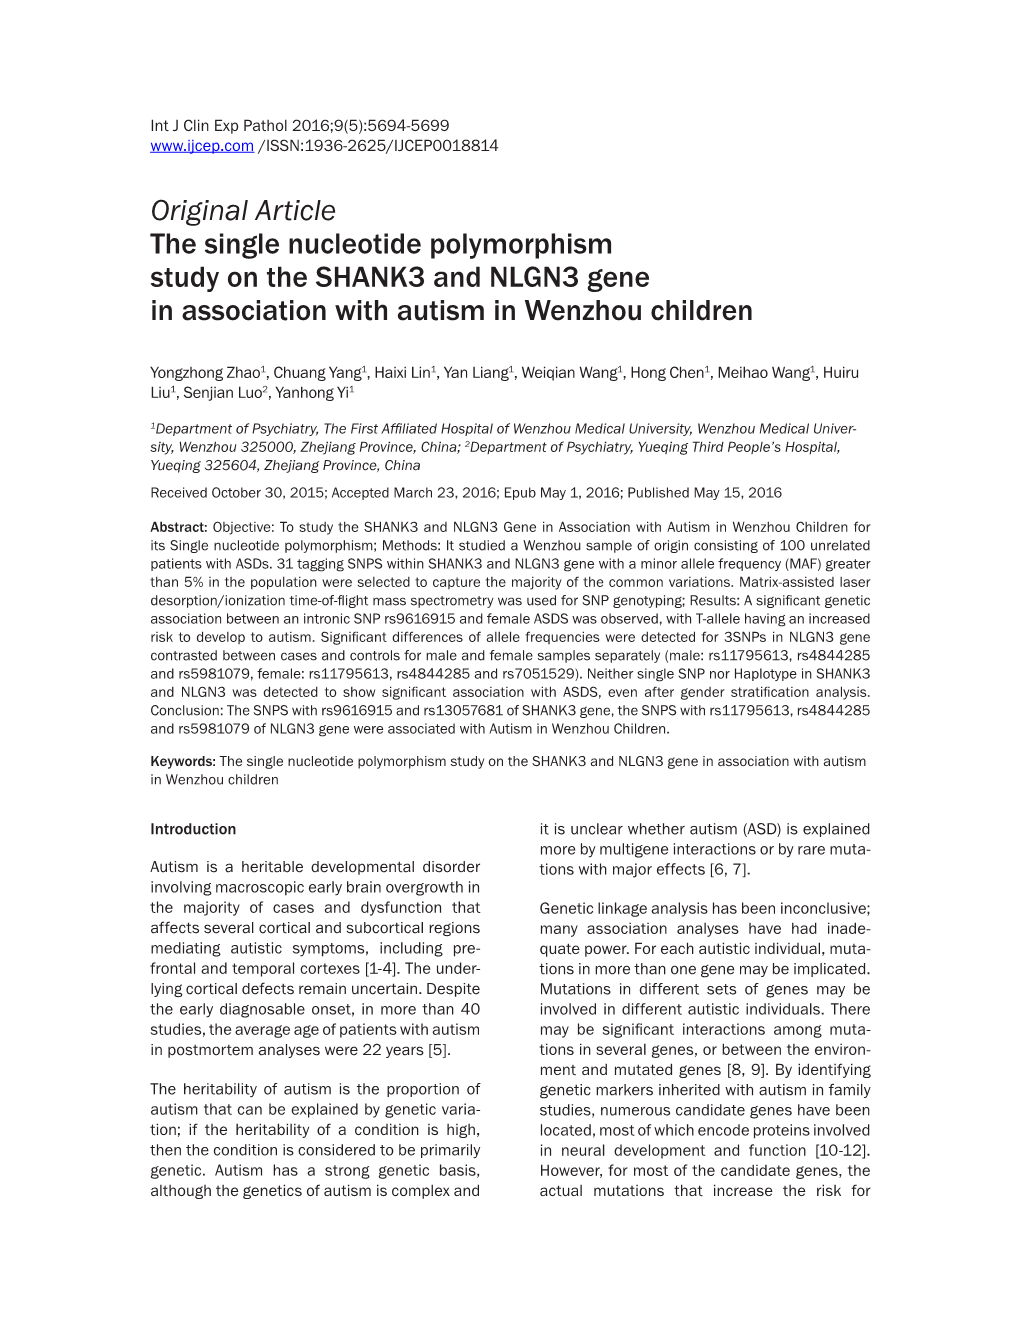 Original Article the Single Nucleotide Polymorphism Study on the SHANK3 and NLGN3 Gene in Association with Autism in Wenzhou Children